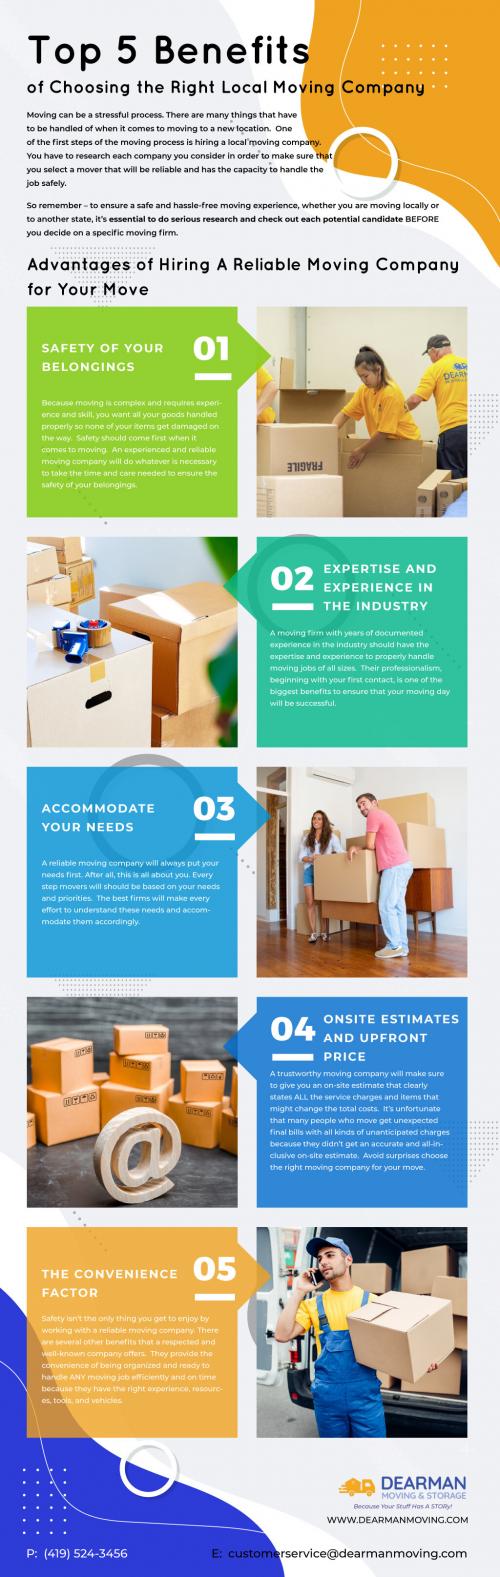 Top 5 Benefits of Choosing the Right Local Moving Company